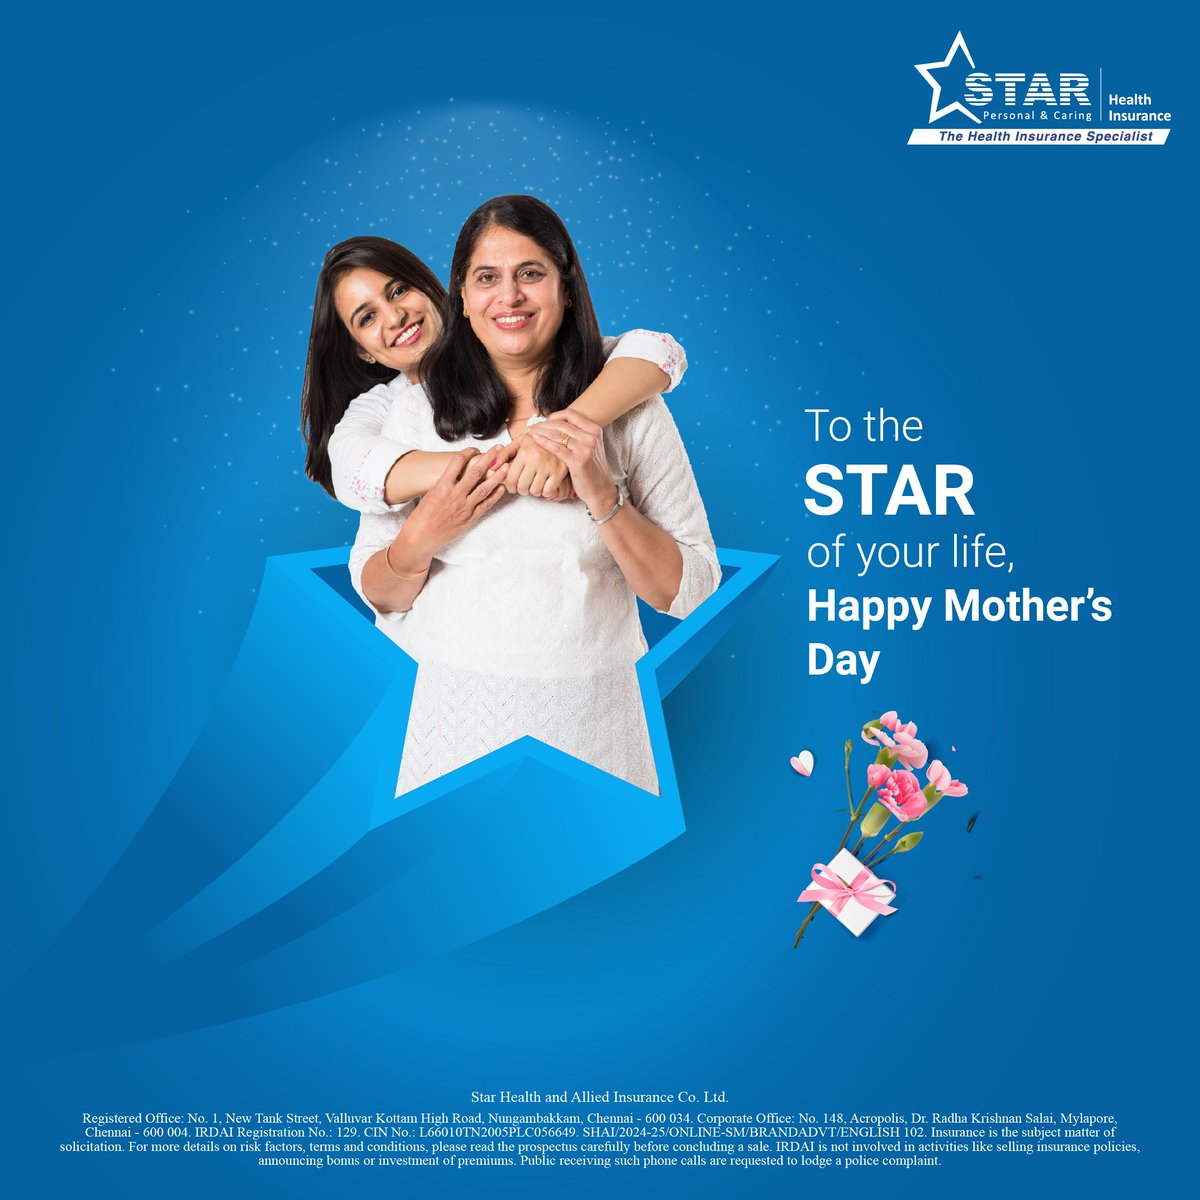 Today, we celebrate the unwavering support and the boundless love of all mothers. Happy Mother's Day to the incredible women who shape our lives and hearts.

#mothersday #mothersday2024 #motherslove #starhealthinaurance #starhealth #healthinsurance